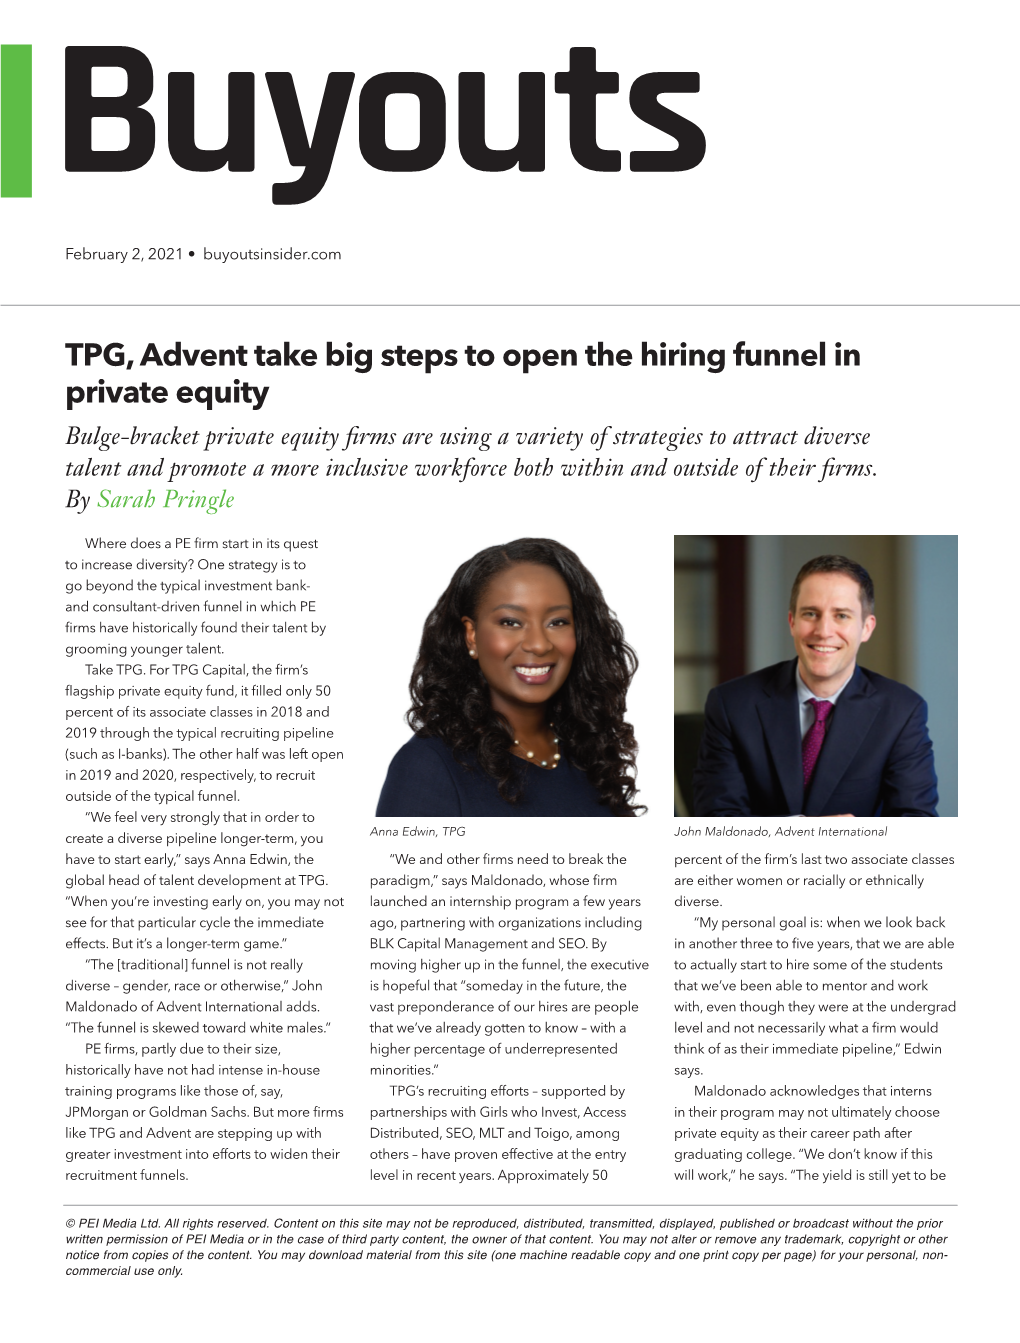 TPG, Advent Take Big Steps to Open the Hiring Funnel in Private Equity.Indd